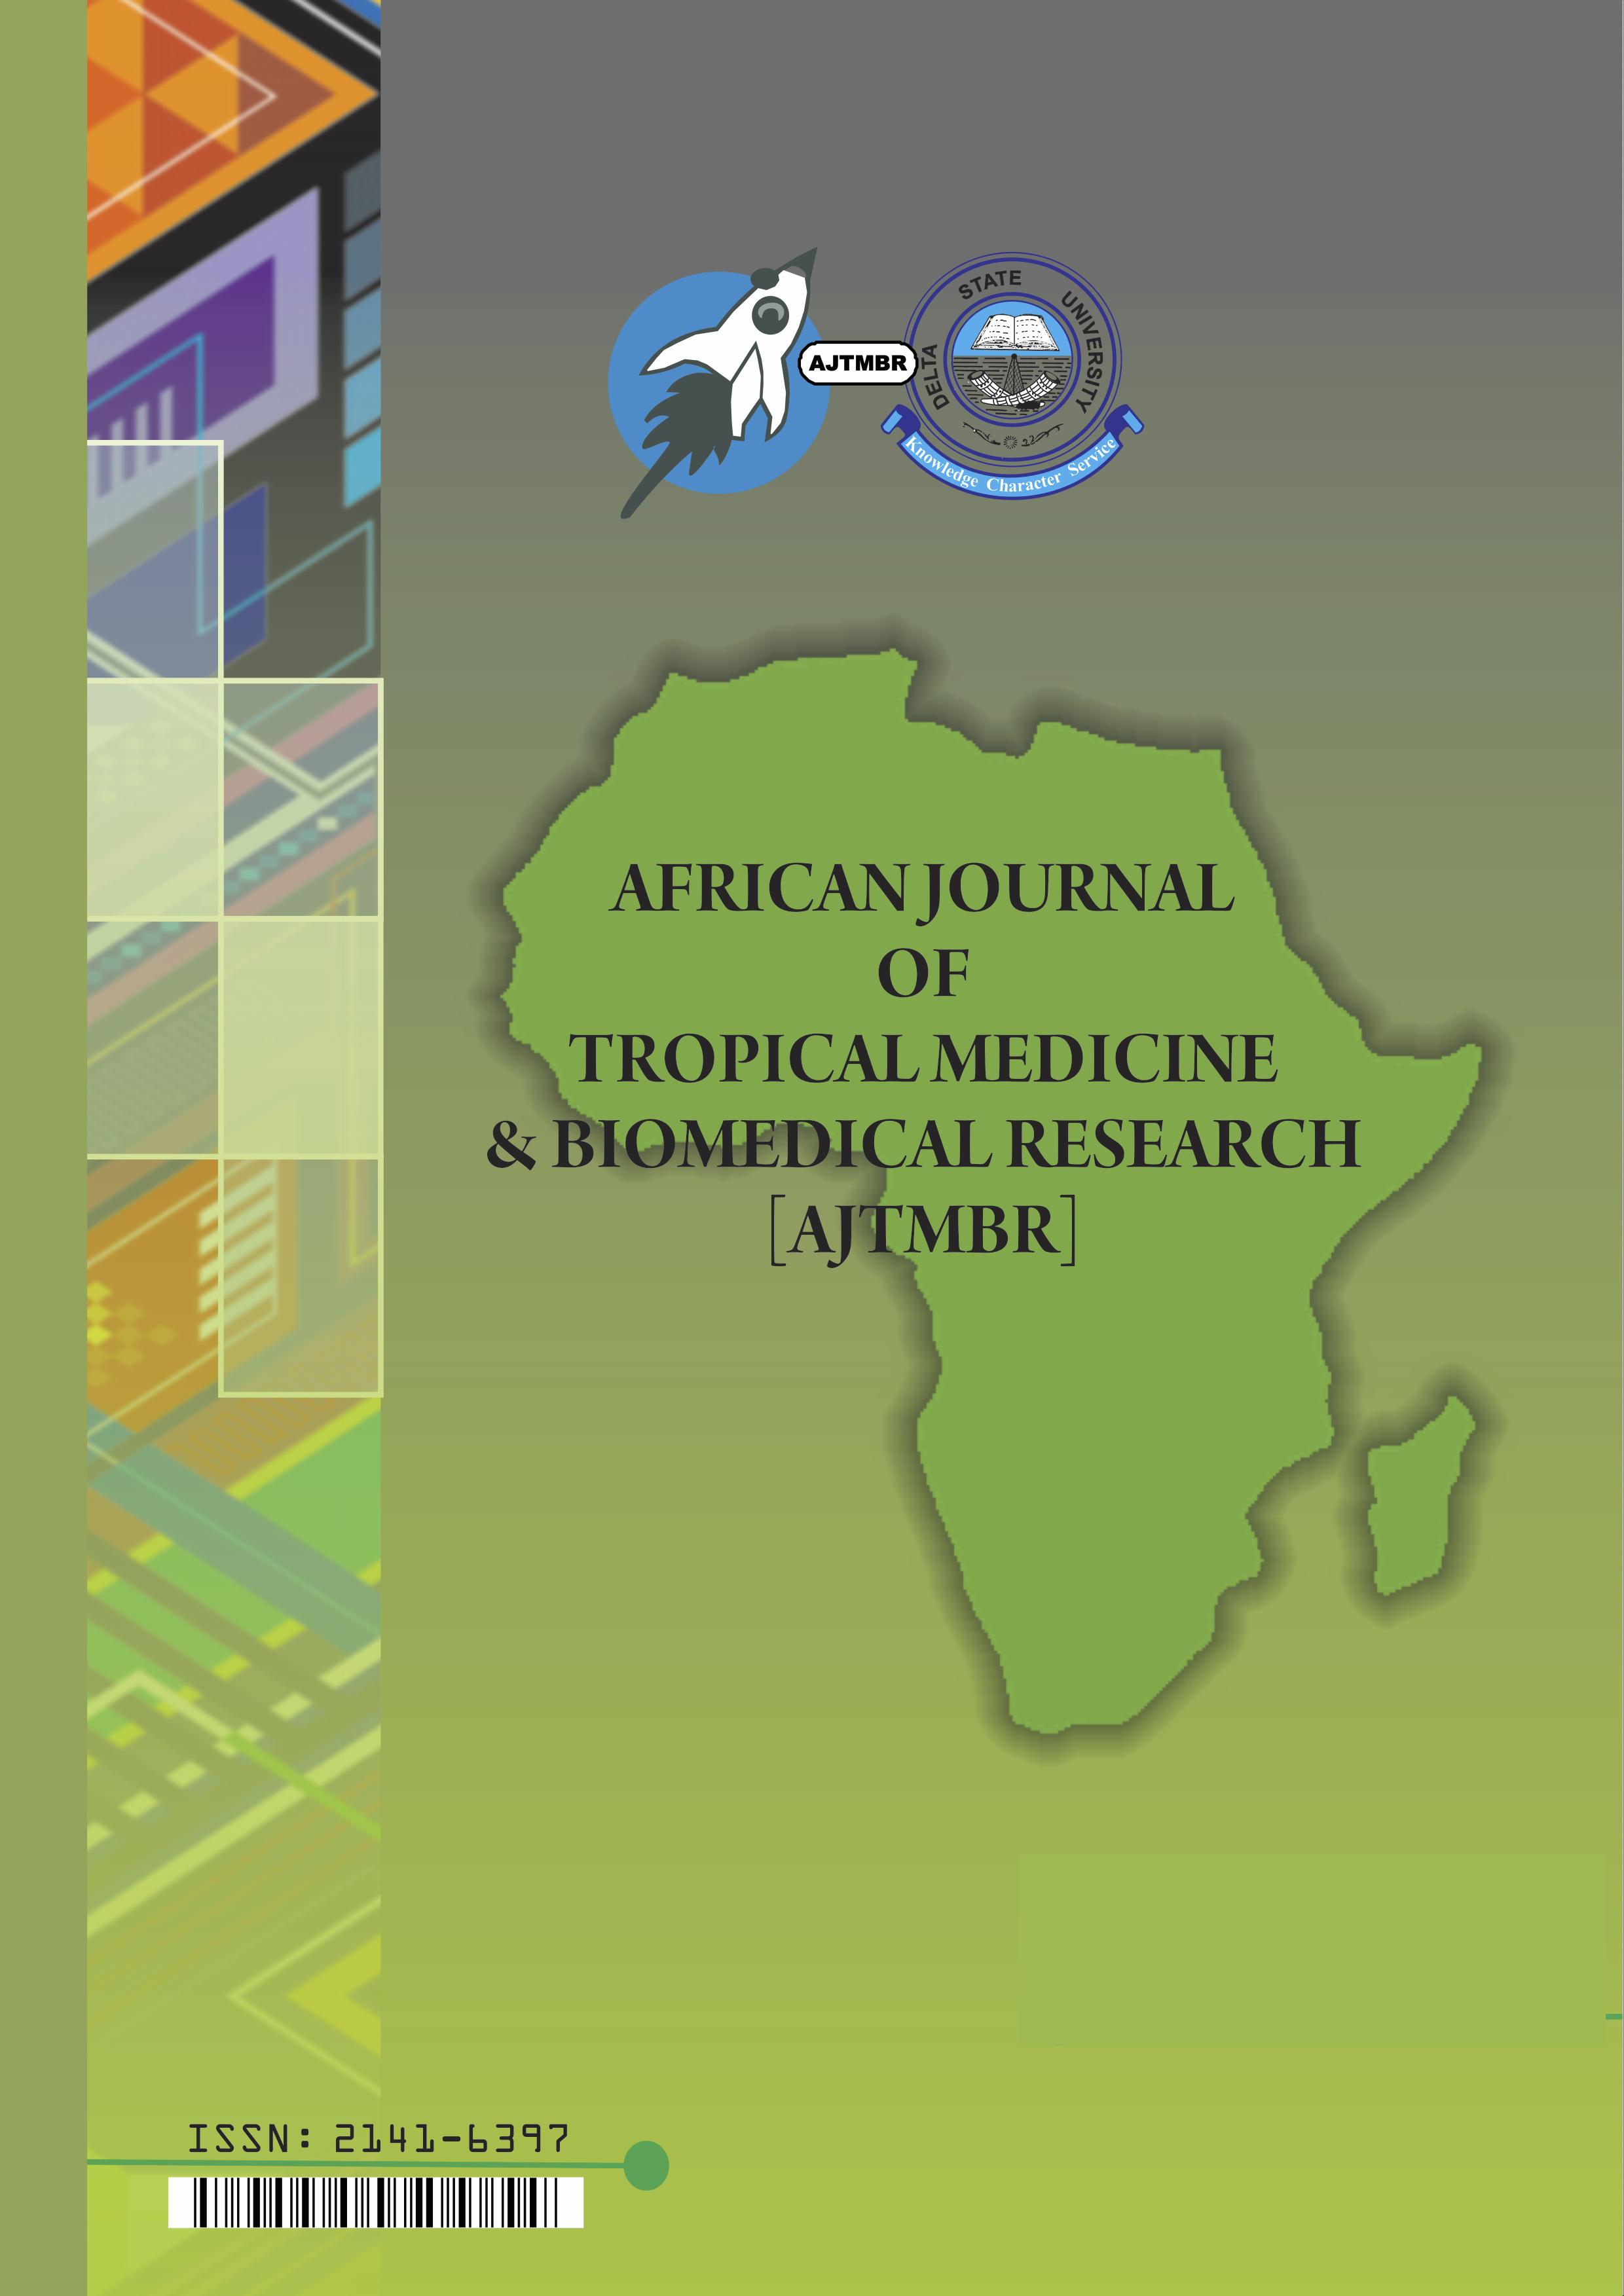 					View Vol. 1 No. 1: African Journal of Tropical Medicine and Biomedical Research March 2010
				